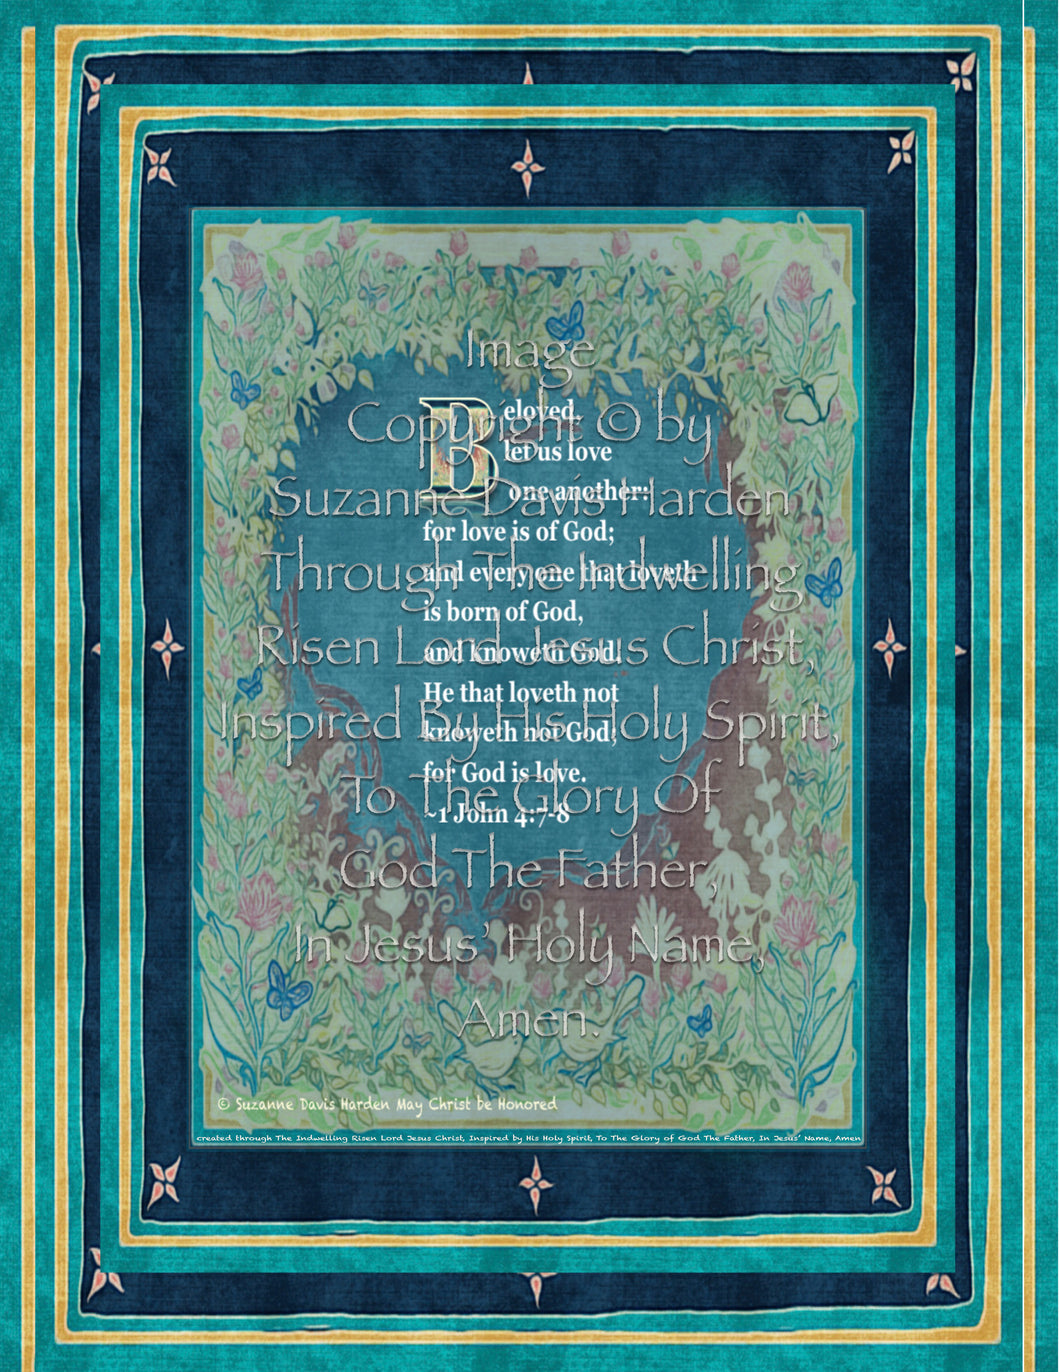 Scripture Prayer Painting watermarked ~ Scripture is 1 John 4:7:8 from the King James Version Bible (Public Domain)